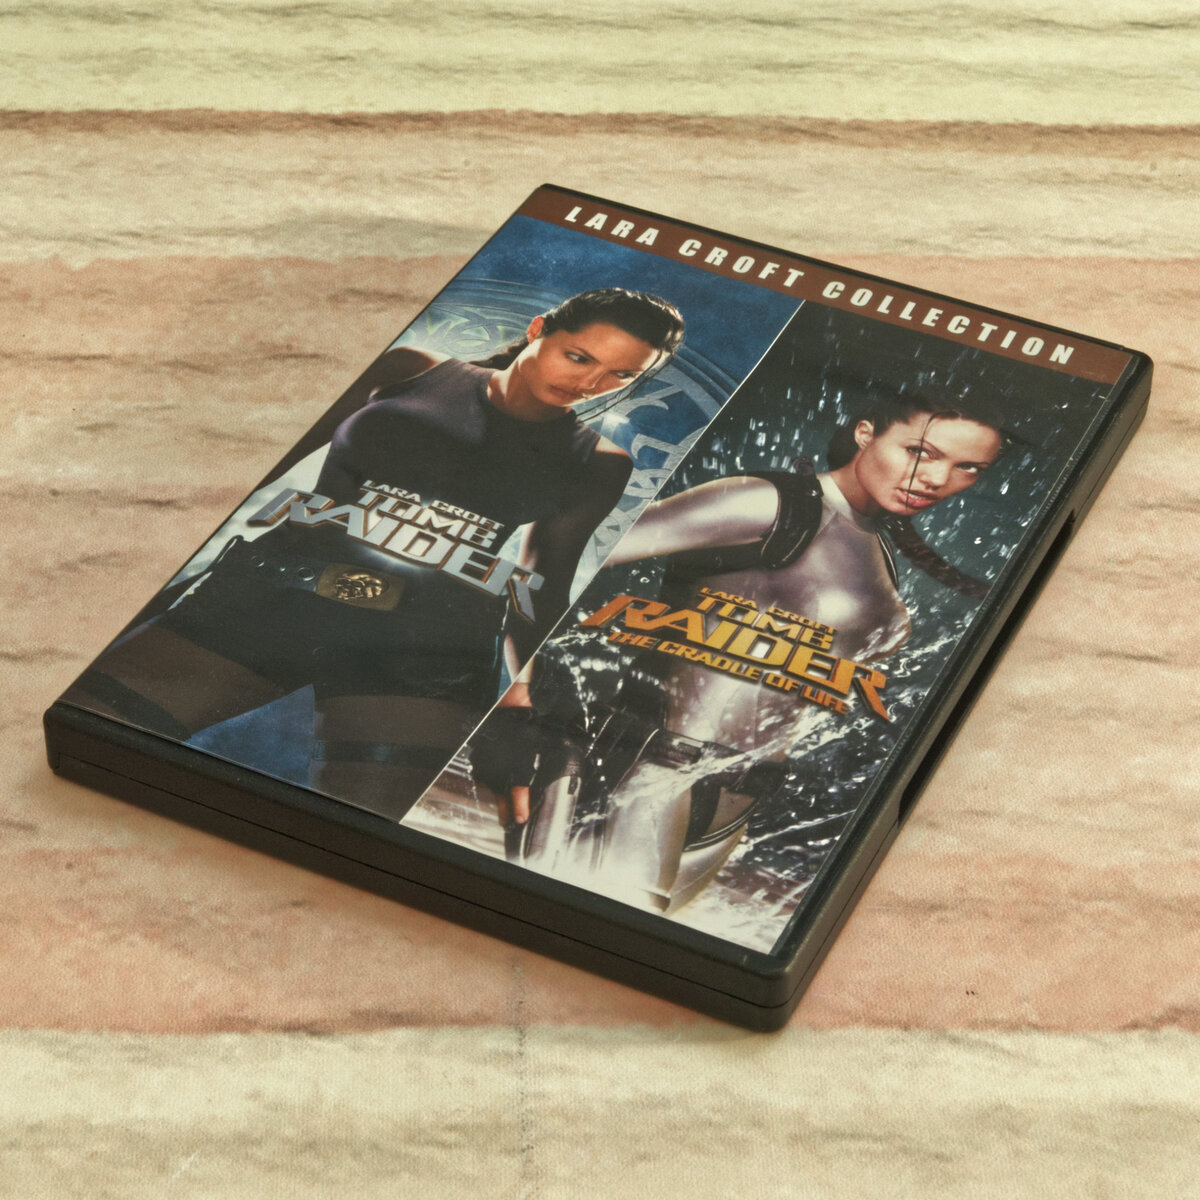 Tomb Raider and Tomb Raider, The Cradle Of Life Double Feature Movie DVD